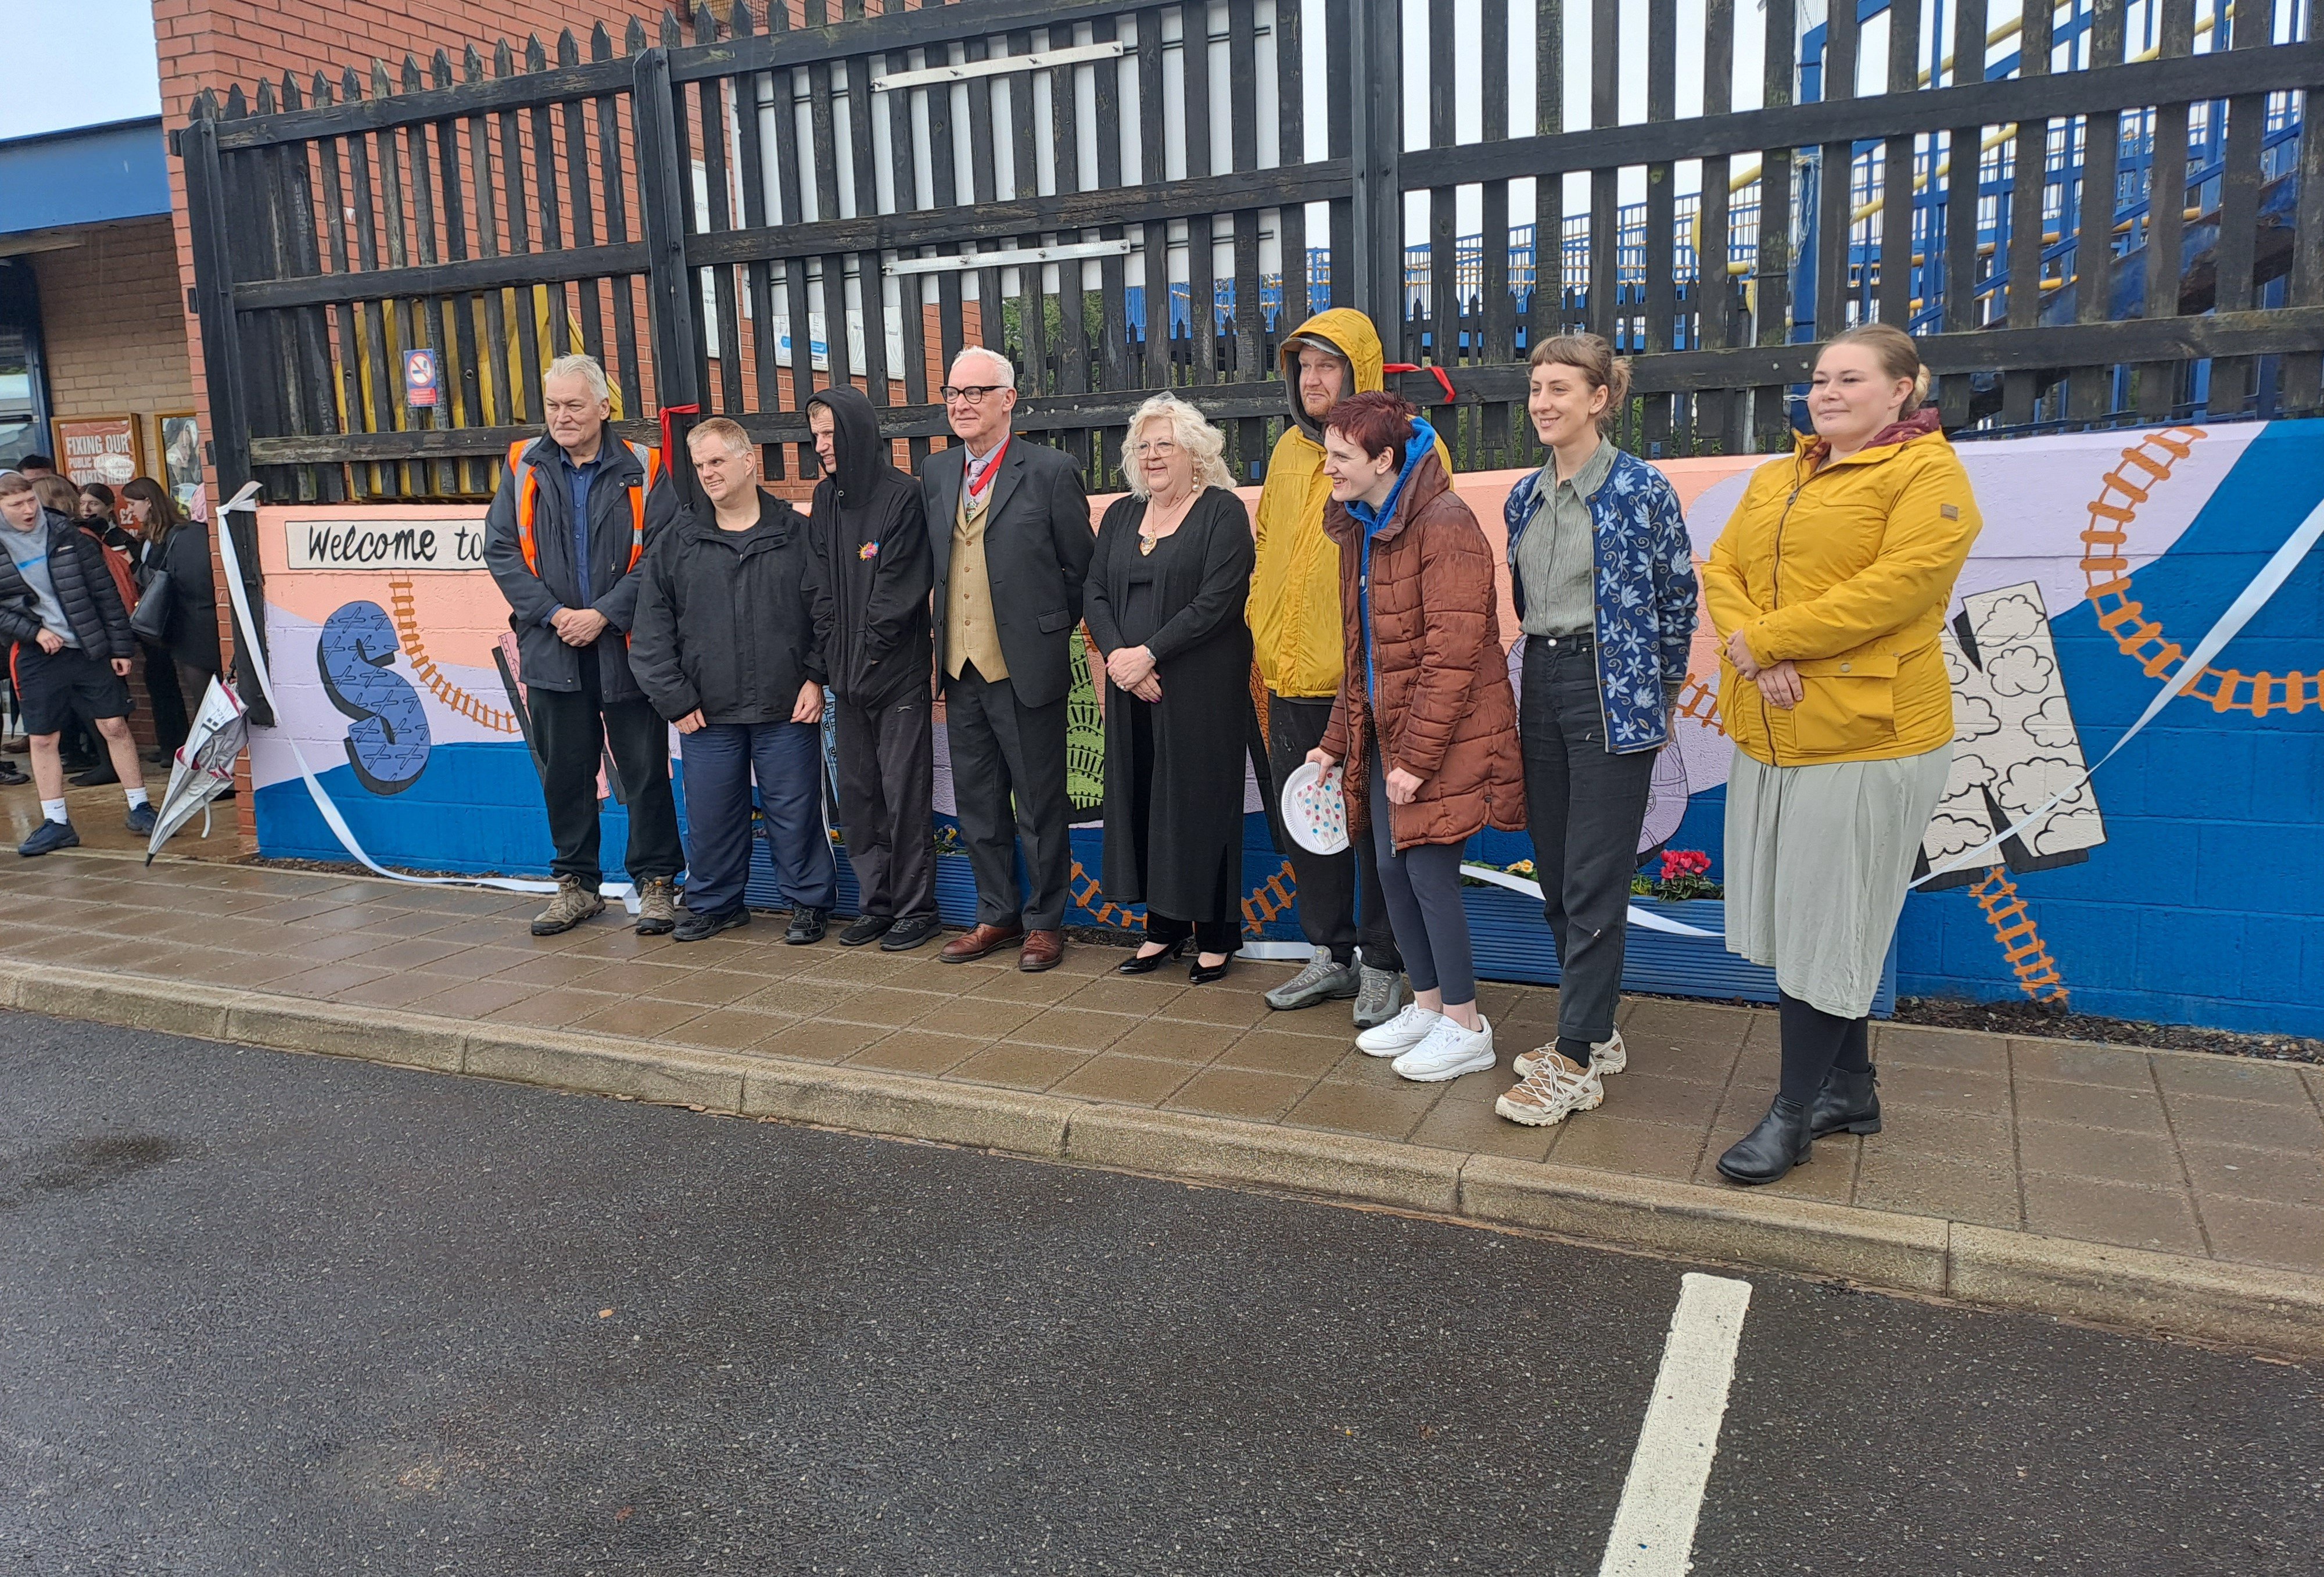 northern-and-members-of-the-station-adoption-groups-celebrate-the-new-artwork-at-swinton